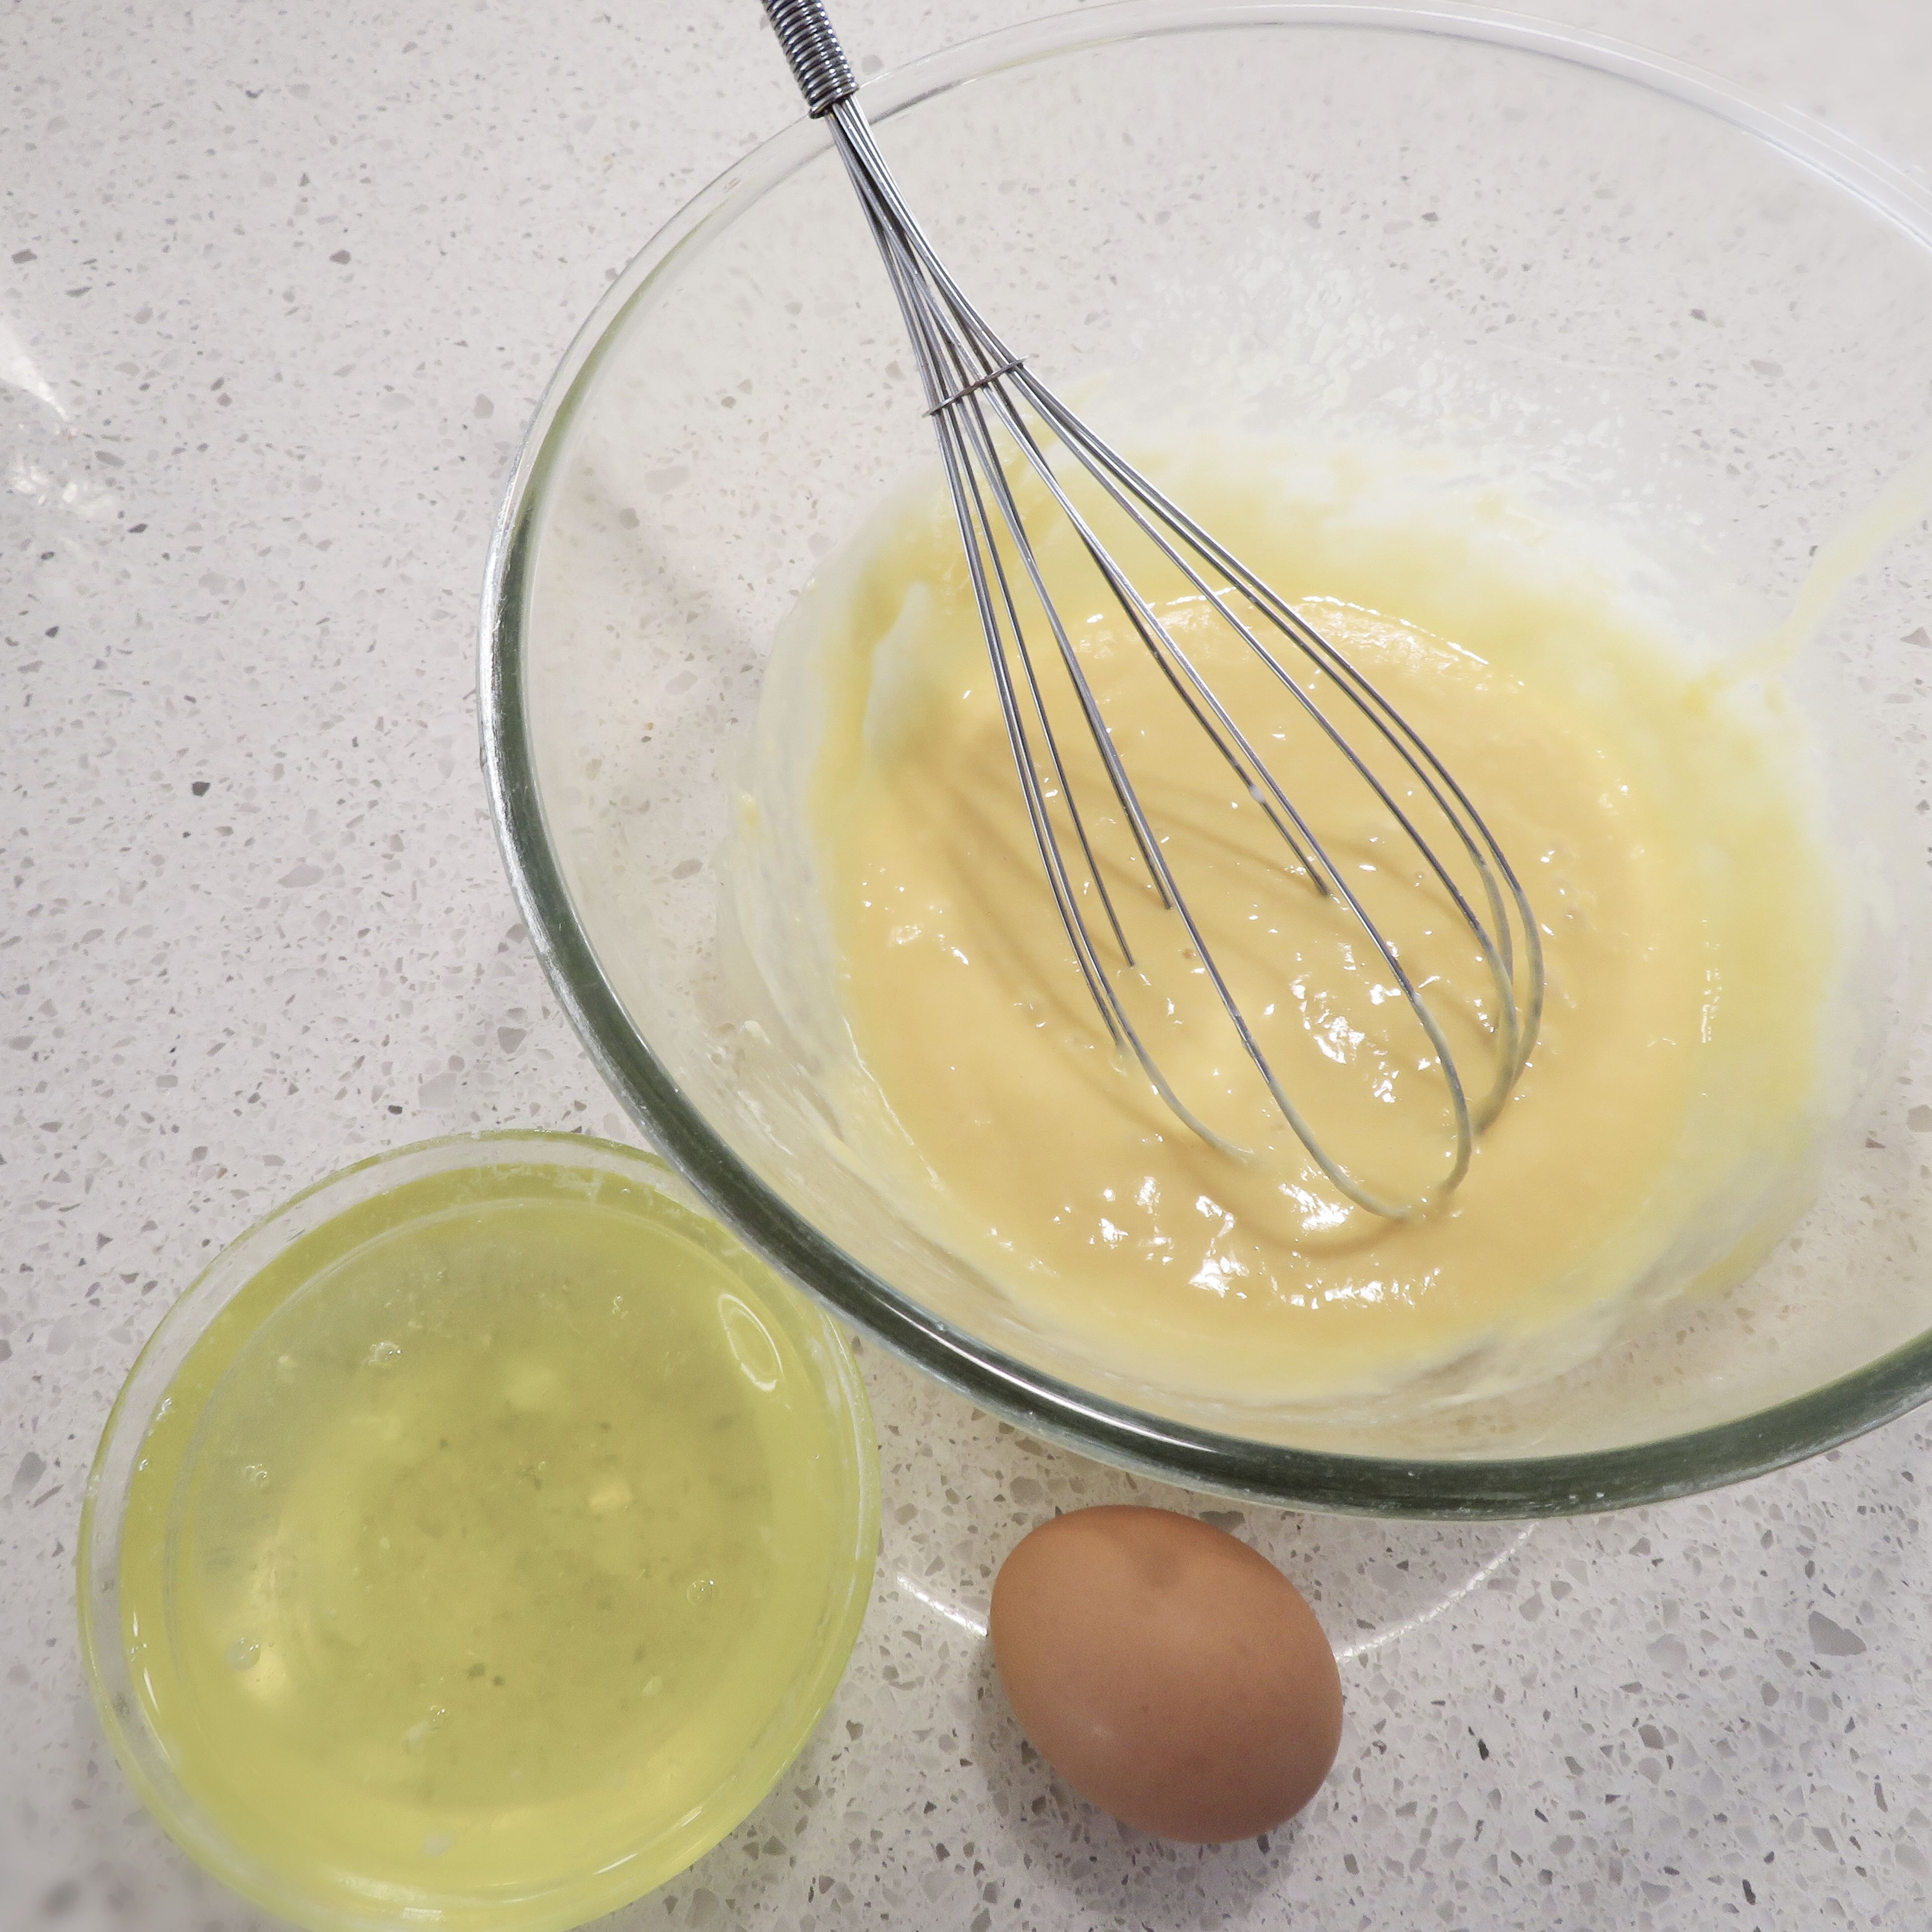 Seperate egg yolk from egg white. Place egg yolk in mixture and leave egg white aside. Then mix together.